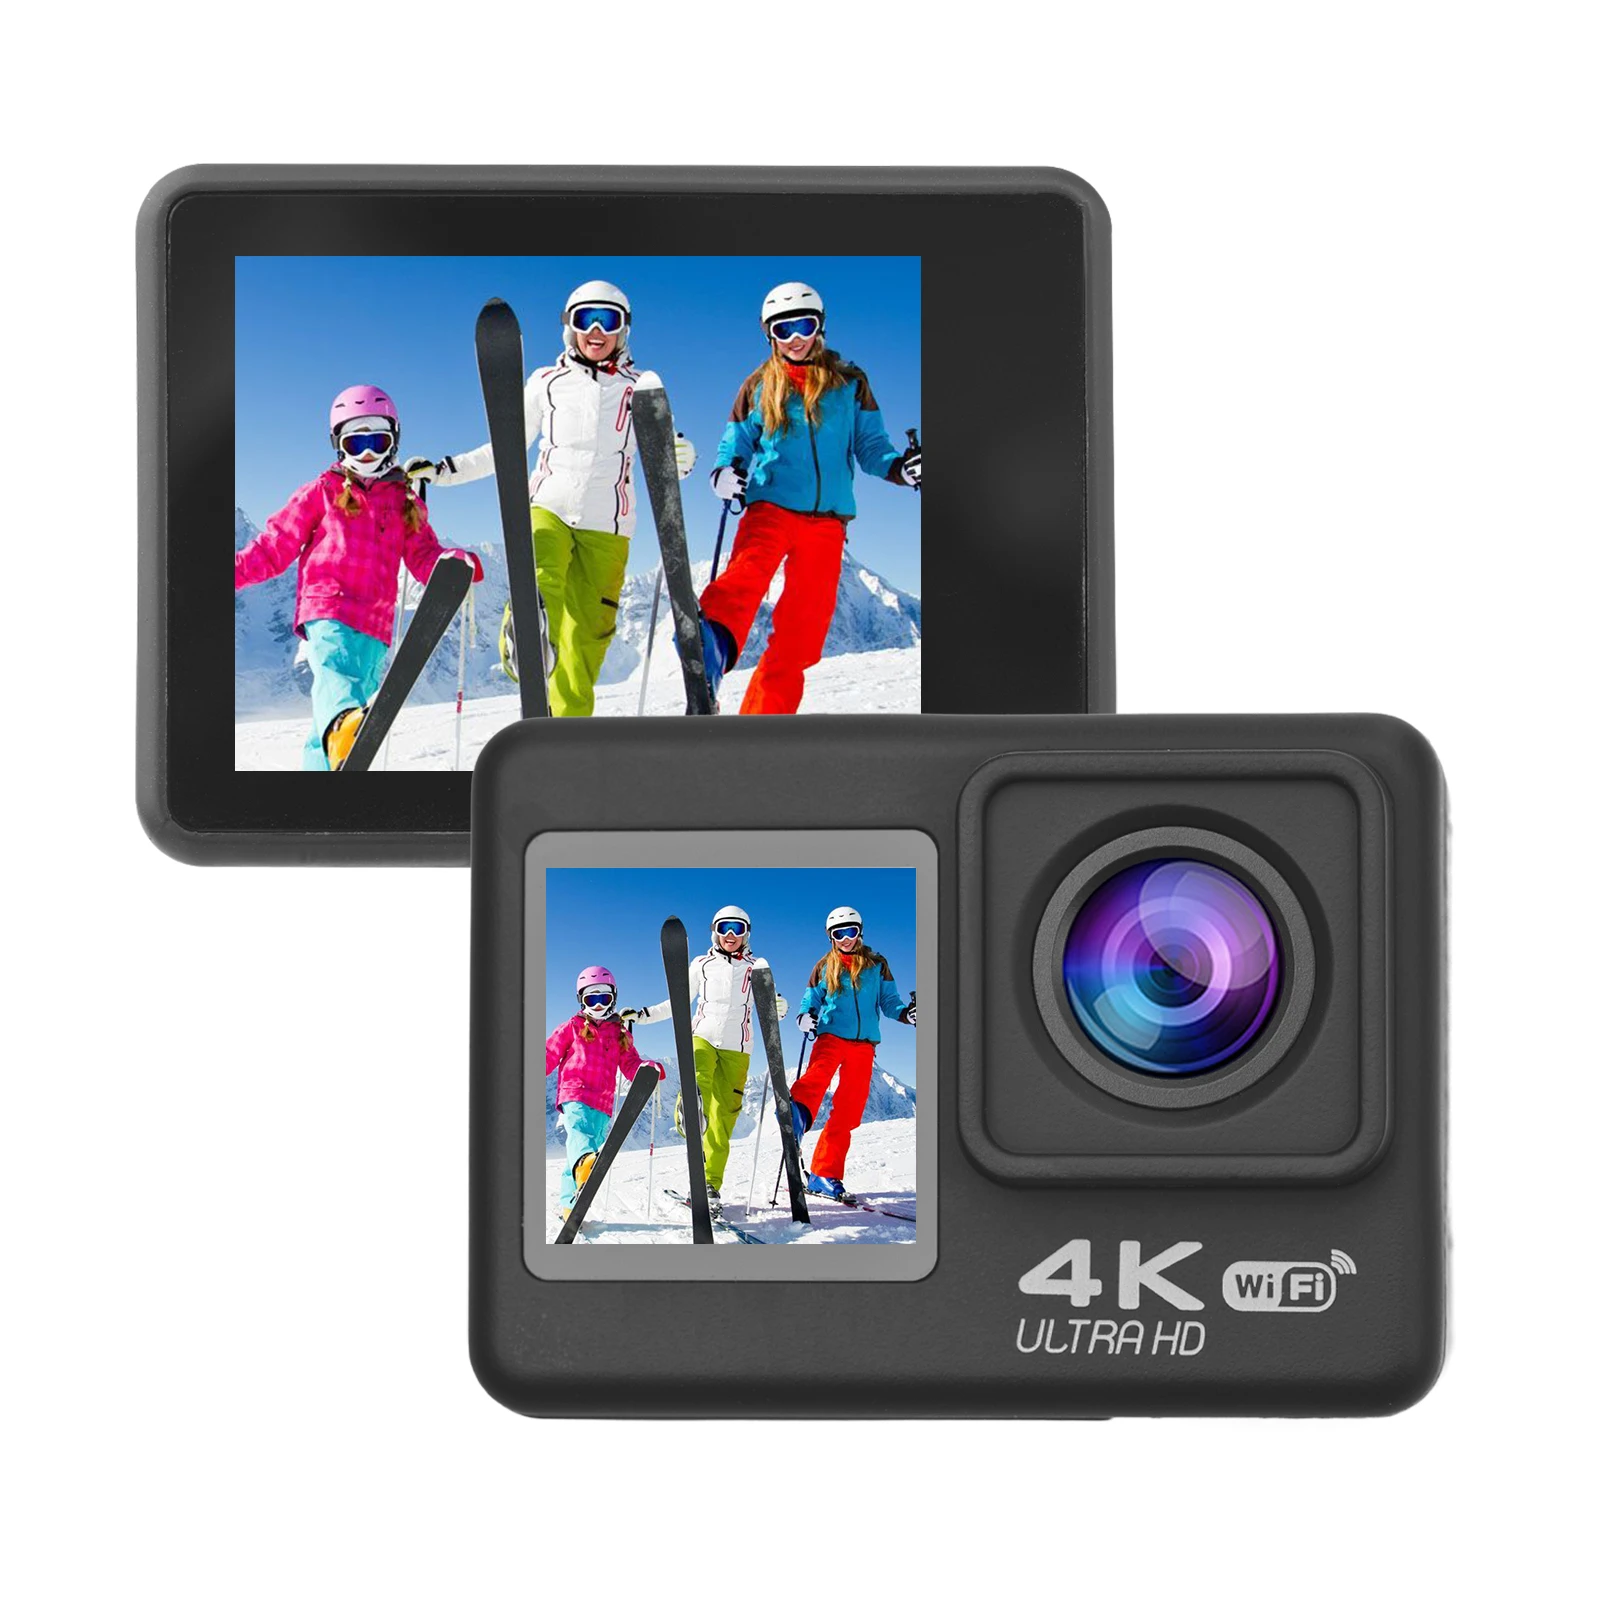 4K60FPS Ultra High Definition WiFi Action Camera Dual Screen 170° Wide Angle 30 Meters Waterproof with Remote Control Battery hunting camcorder